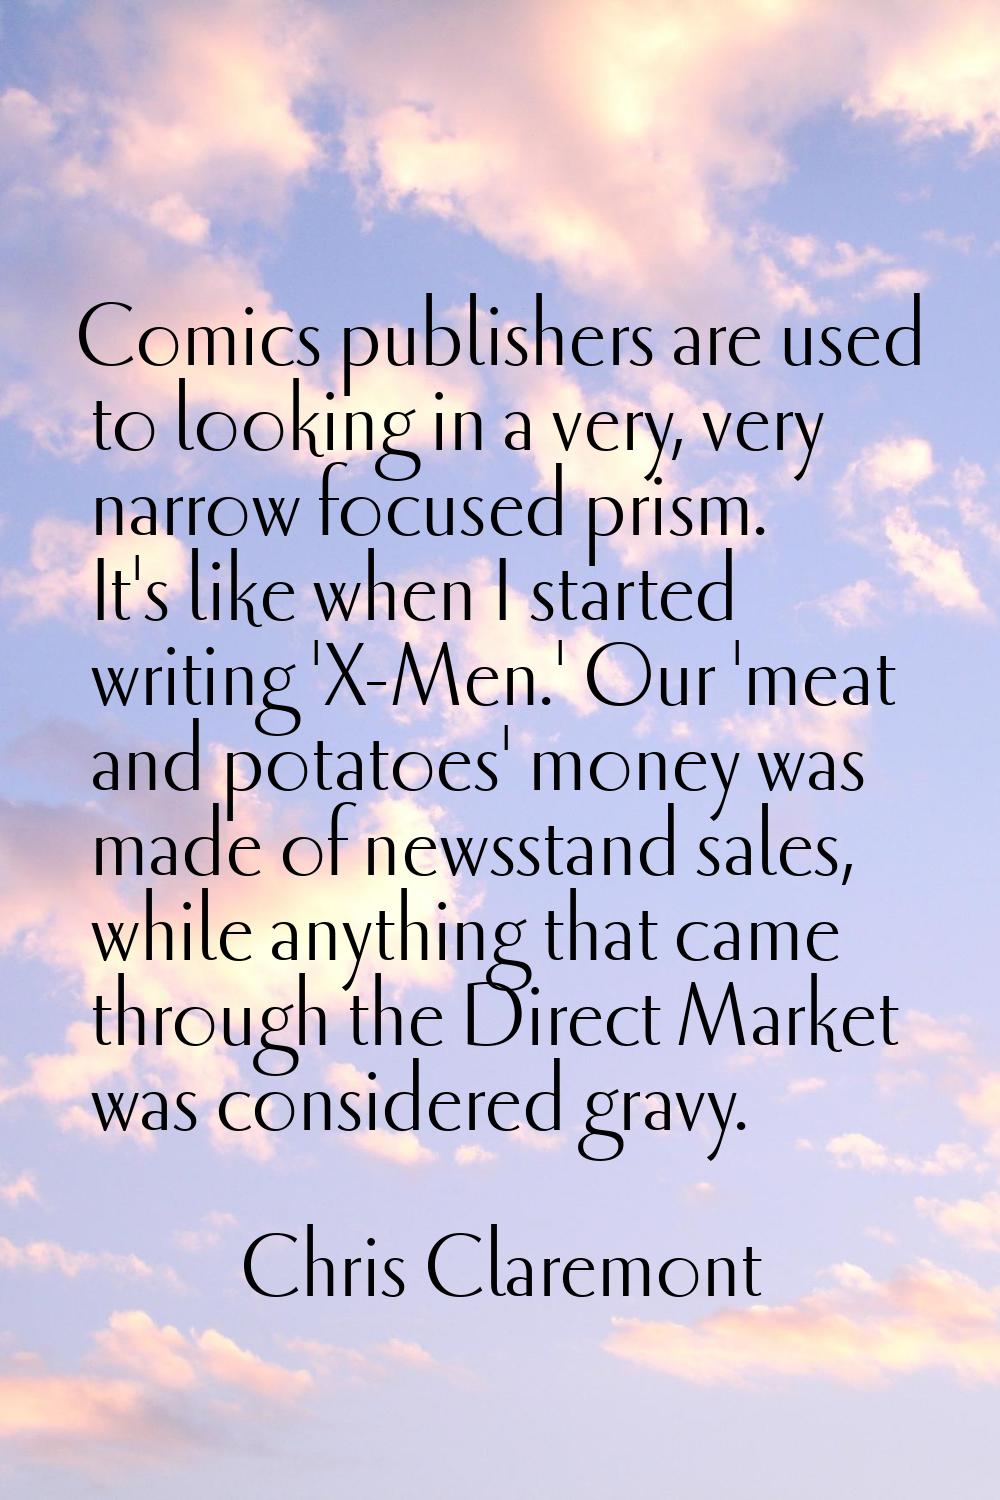 Comics publishers are used to looking in a very, very narrow focused prism. It's like when I starte